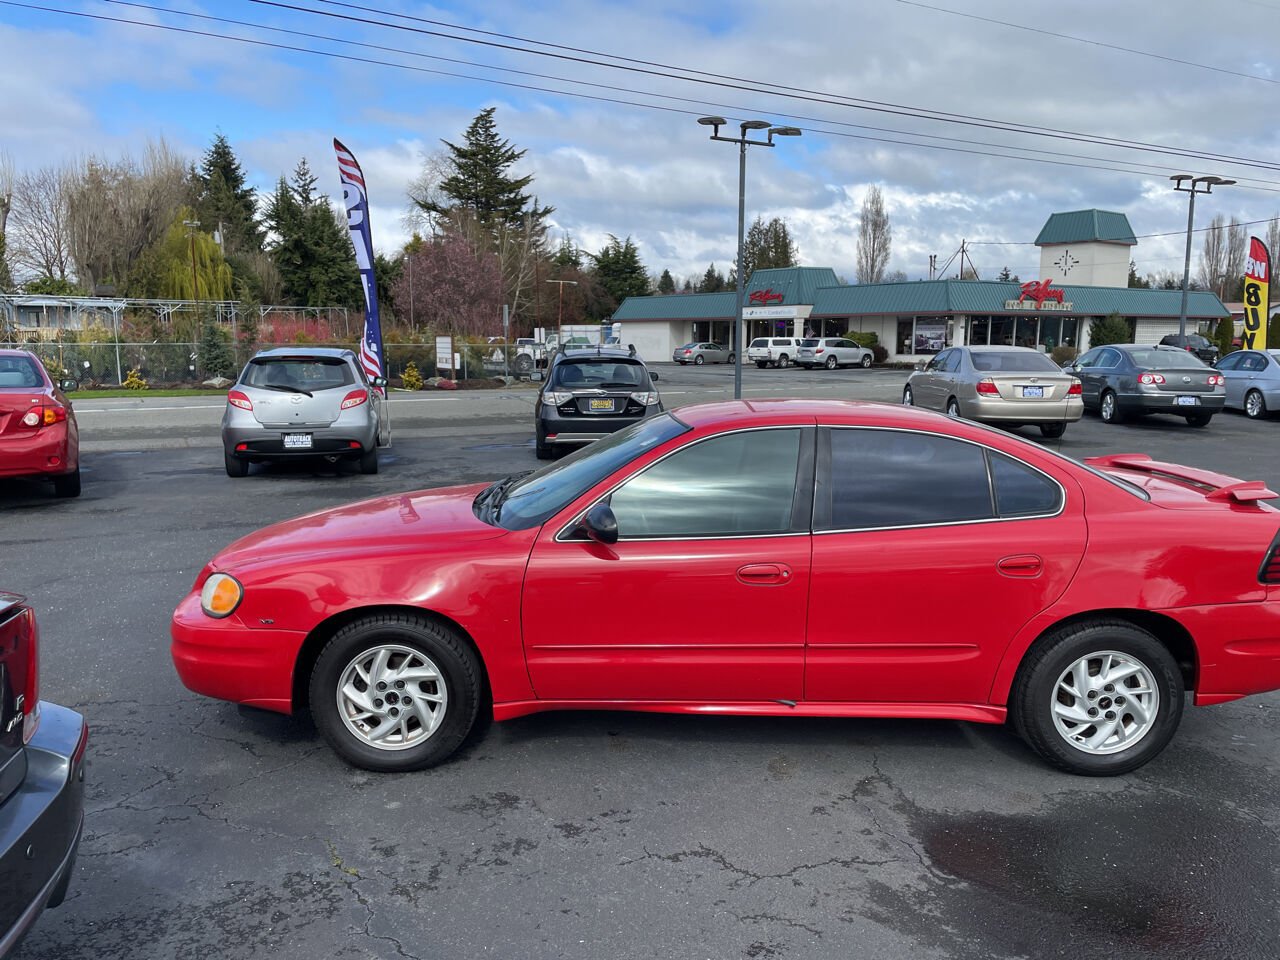 Used 2003 Pontiac Grand Am for Sale Right Now - Autotrader